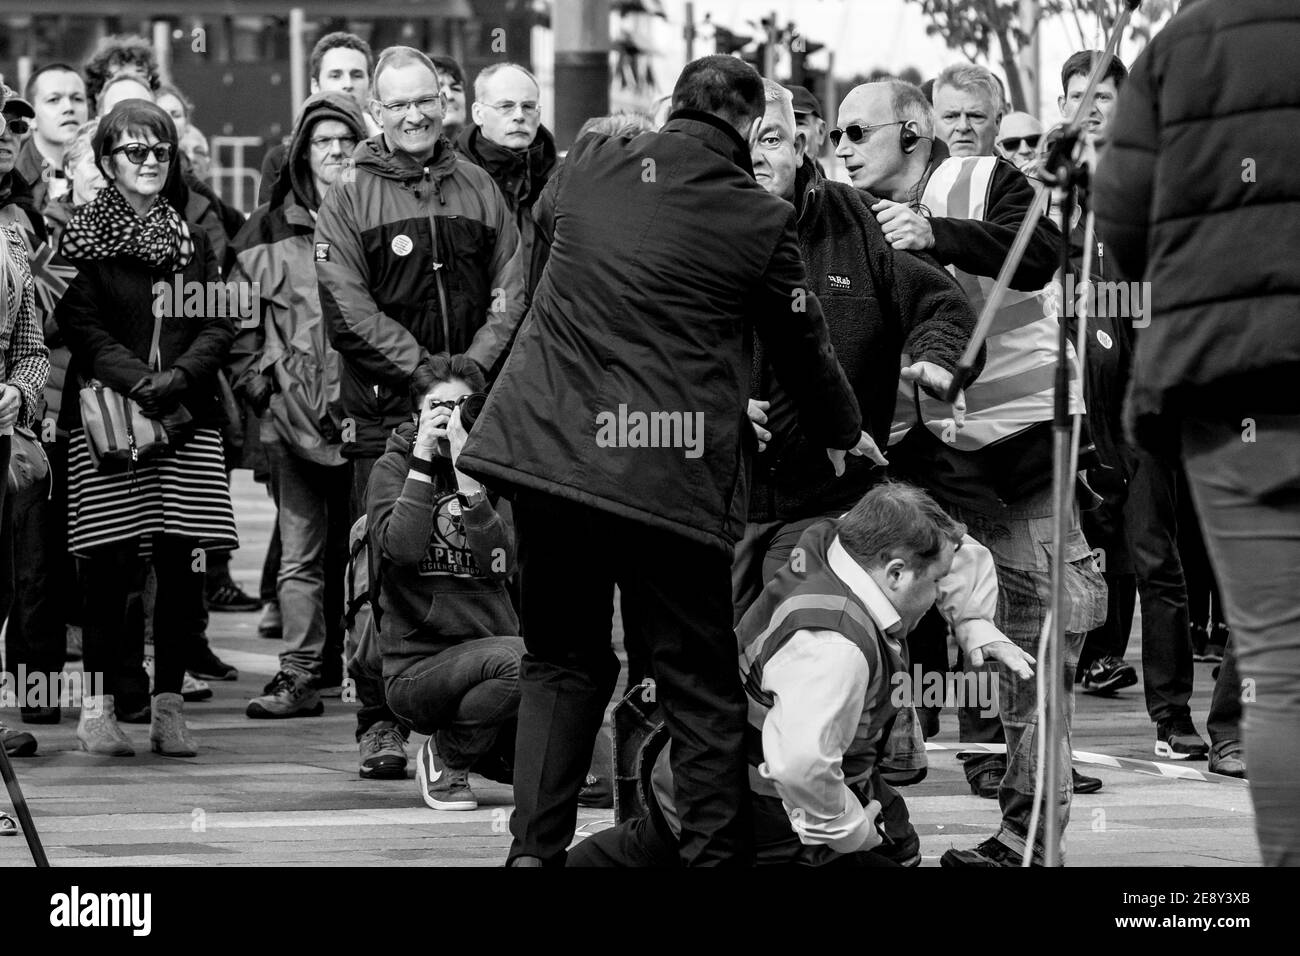 Some people supporting Brexit interrupting aggressively the People's Vote rally on Keele Square. Documentary photographer, Jenny Goodfellow, seen documenting the skirmish in the thick of it. 6th October 2018, Sunderland, England. Stock Photo